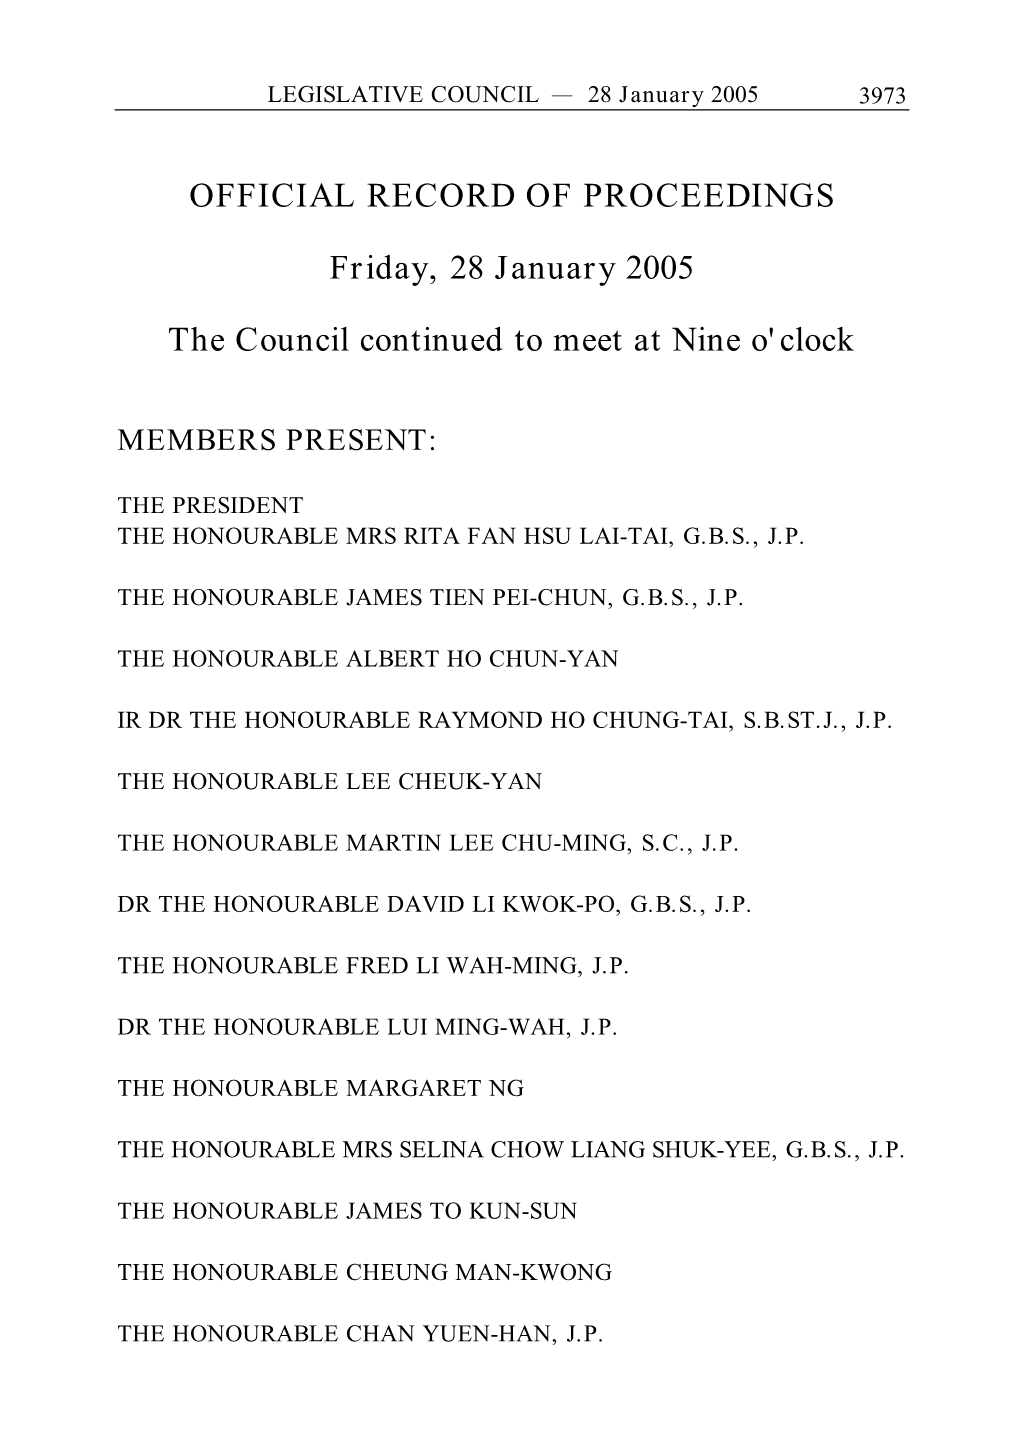 OFFICIAL RECORD of PROCEEDINGS Friday, 28 January